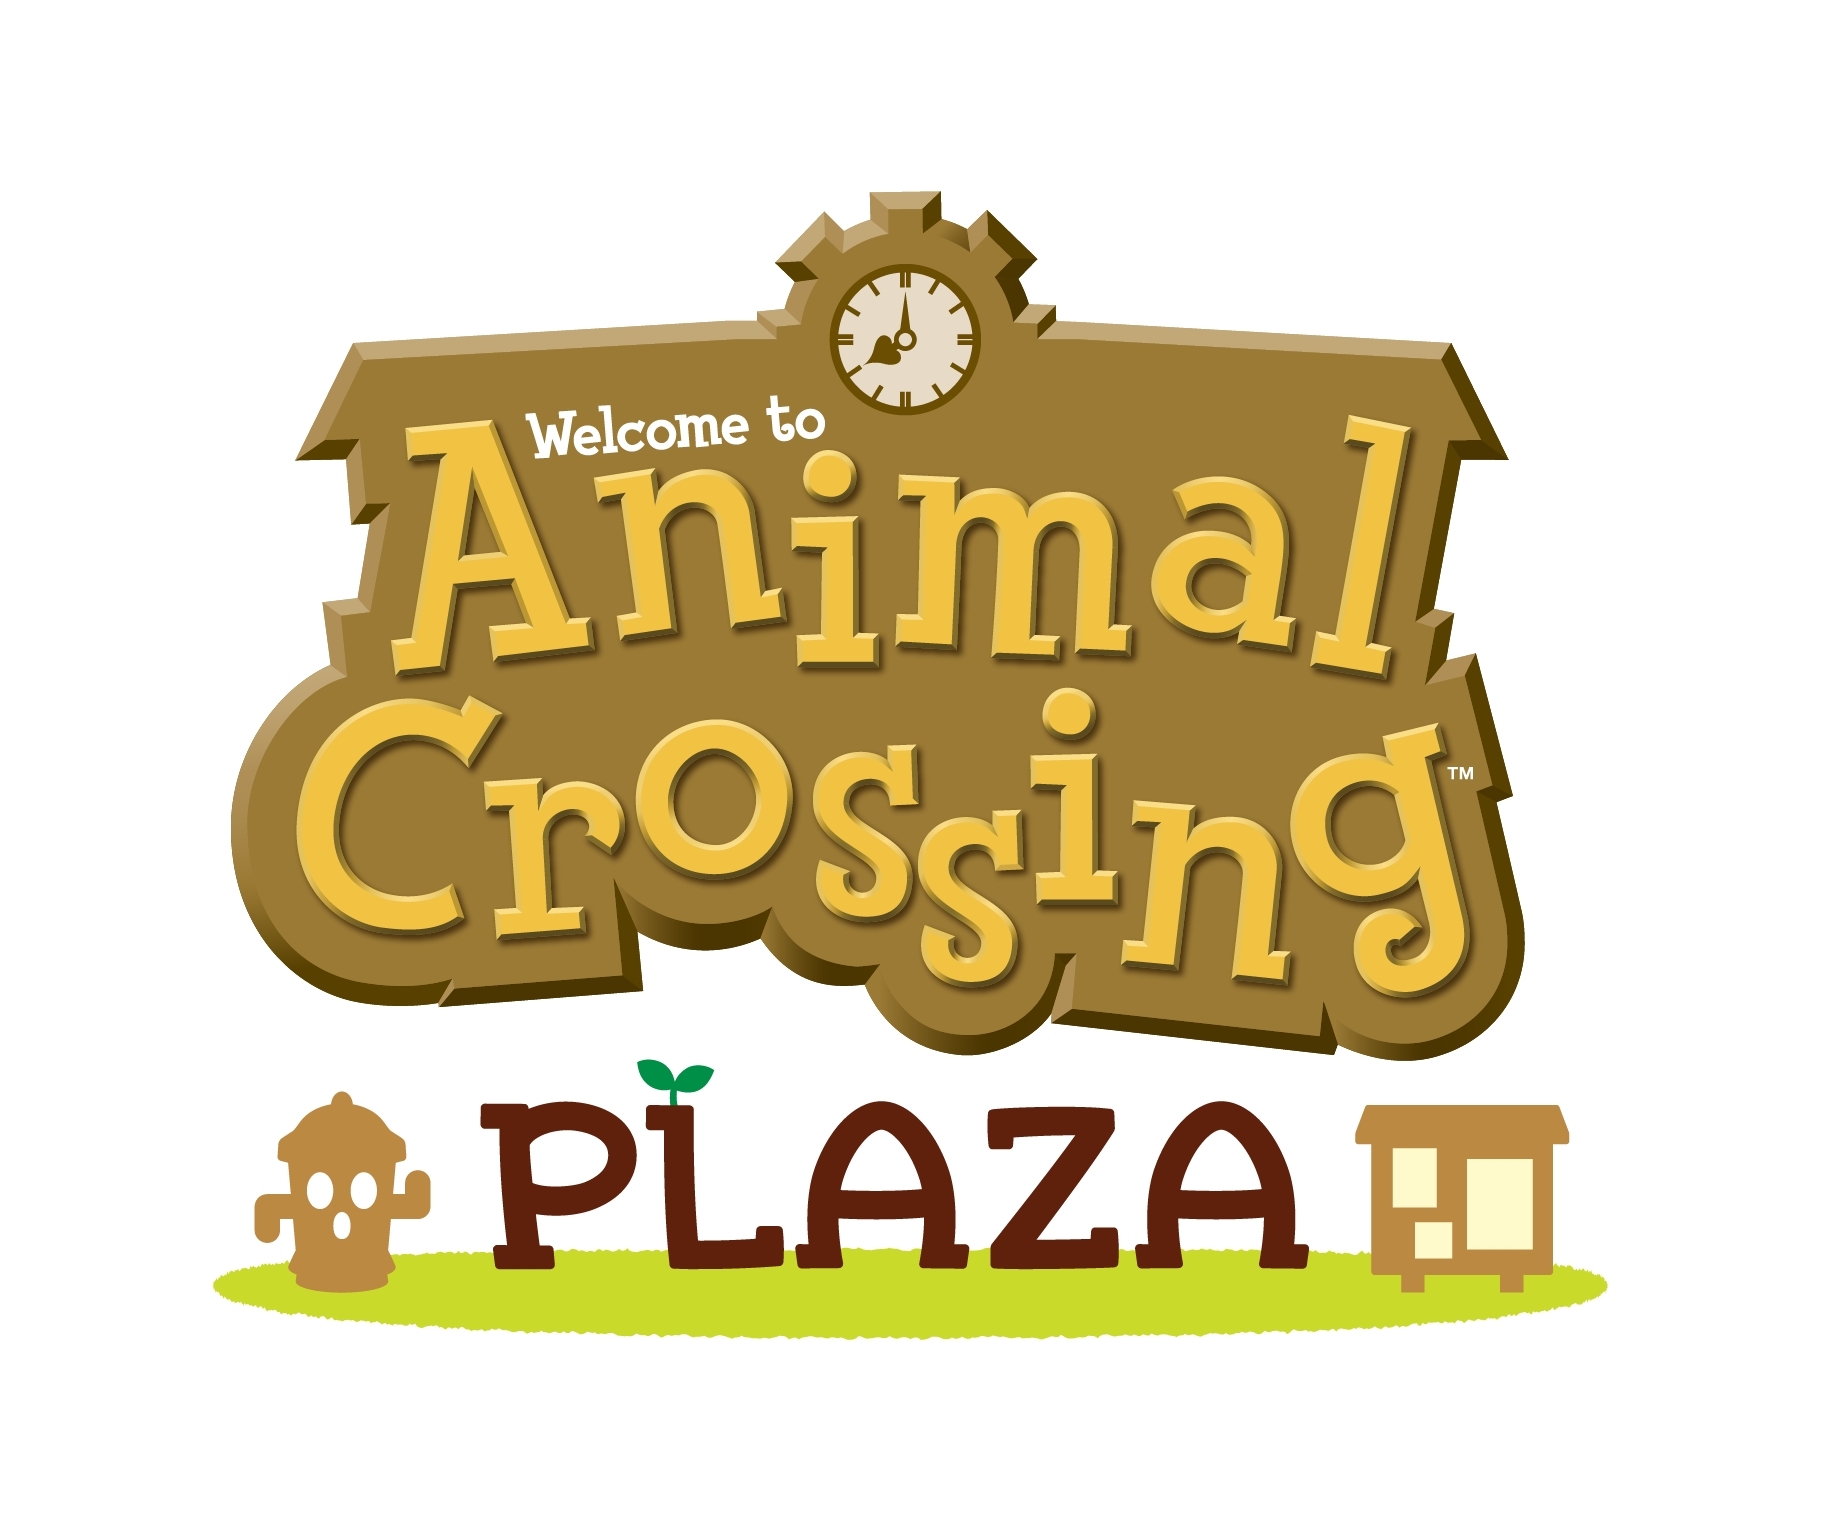 Nintendo Launches Animal Crossing Plaza on Wii U | Business Wire